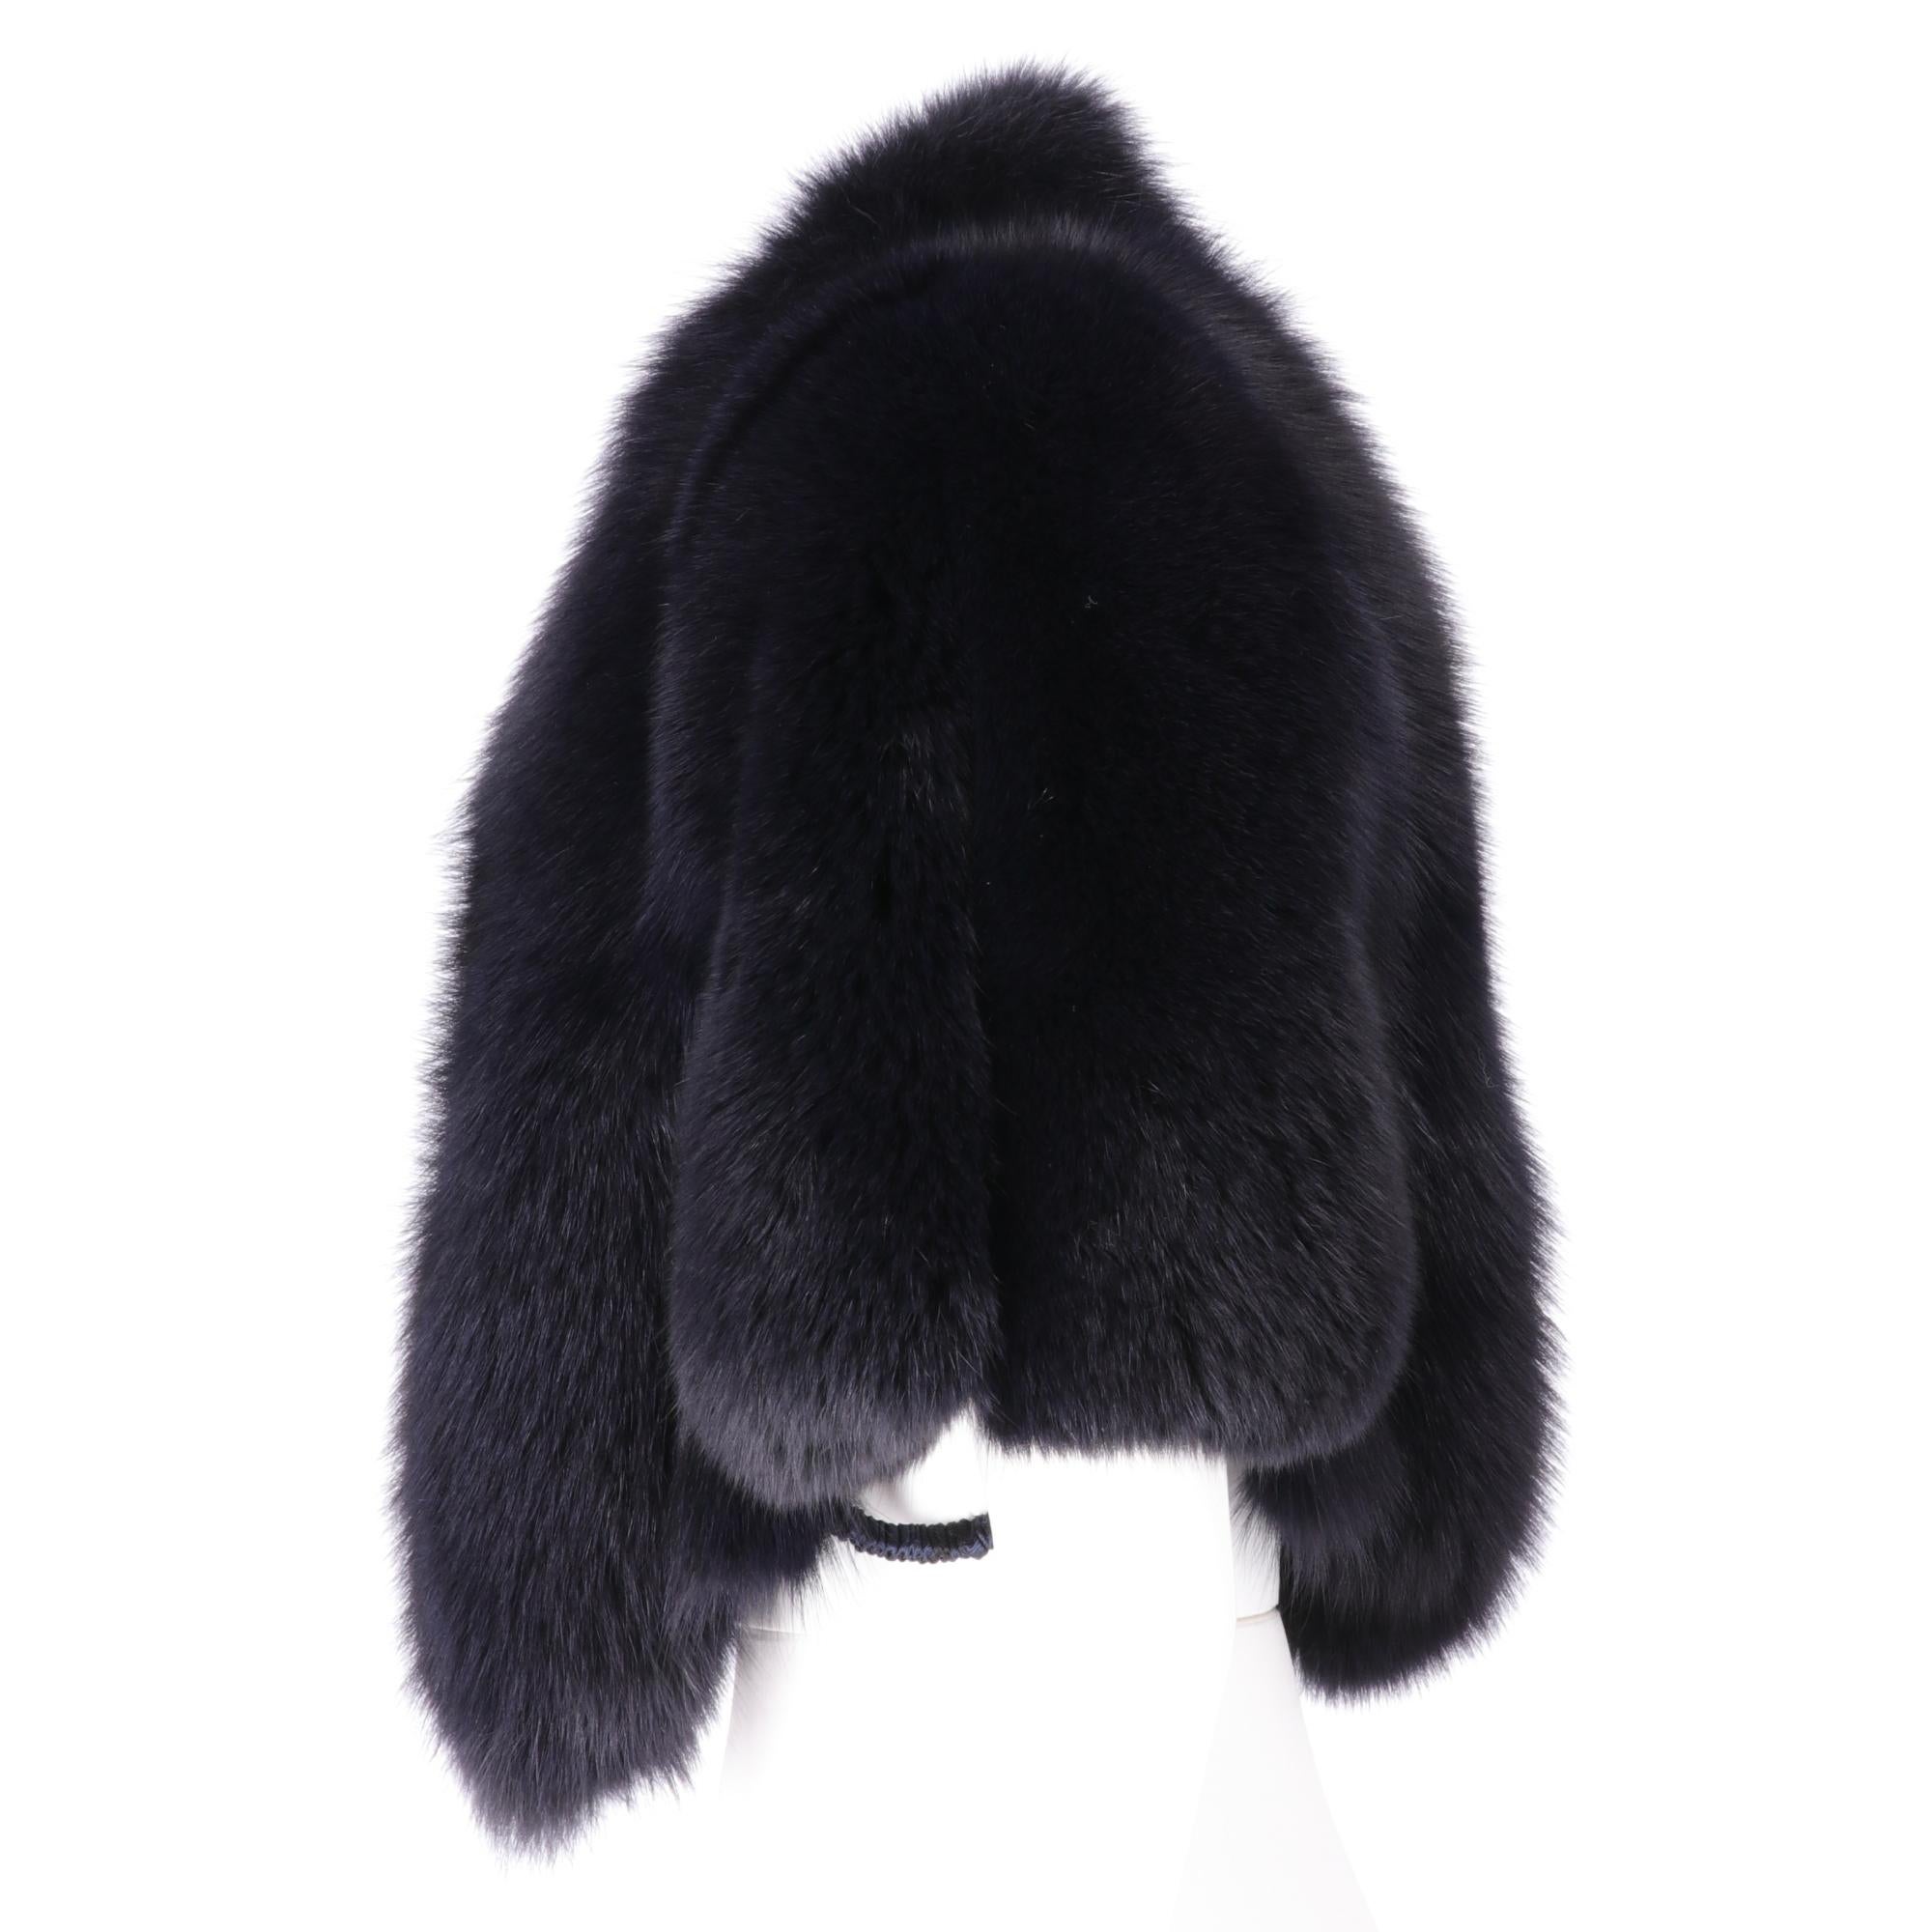 Gianfranco Ferrè real blue fox fur short to the waist cape, with inserts in leather of the same color, padded shoulders, elastic bands and hooks for the arms, lined in silk jacquard fabric, front closure with hook and chain.

This item belongs to an